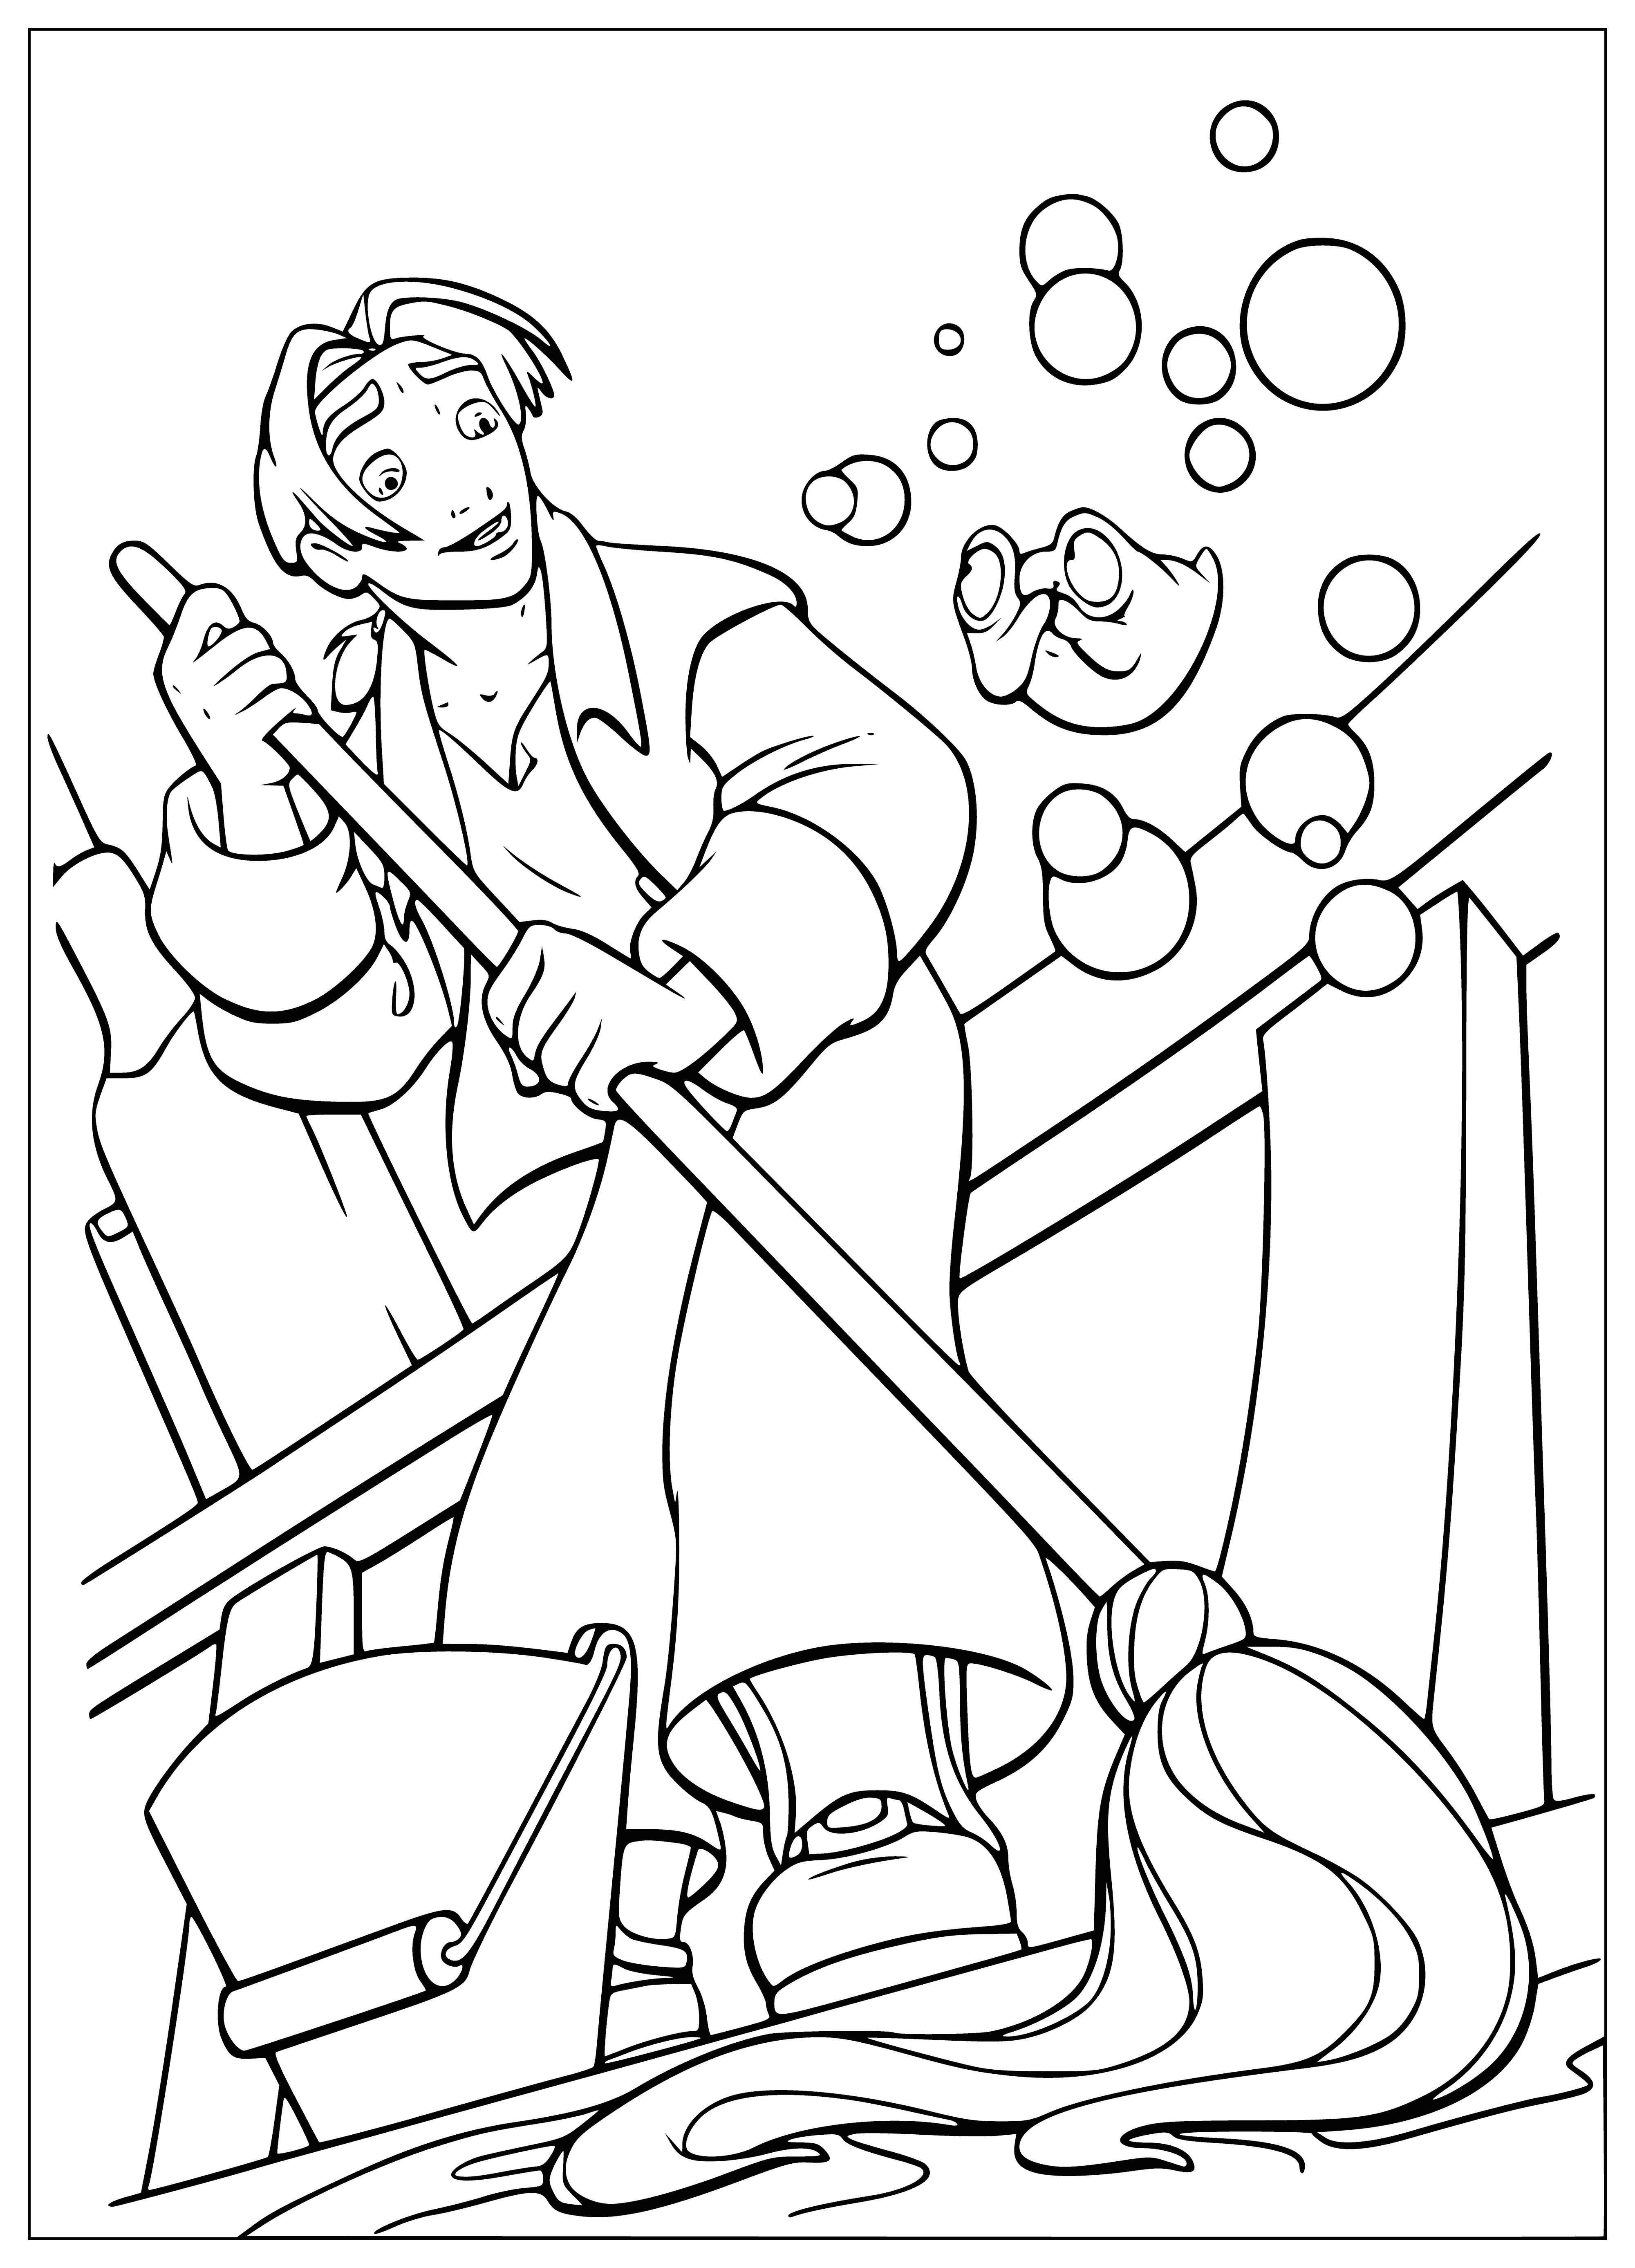 Jim and Morph coloring page